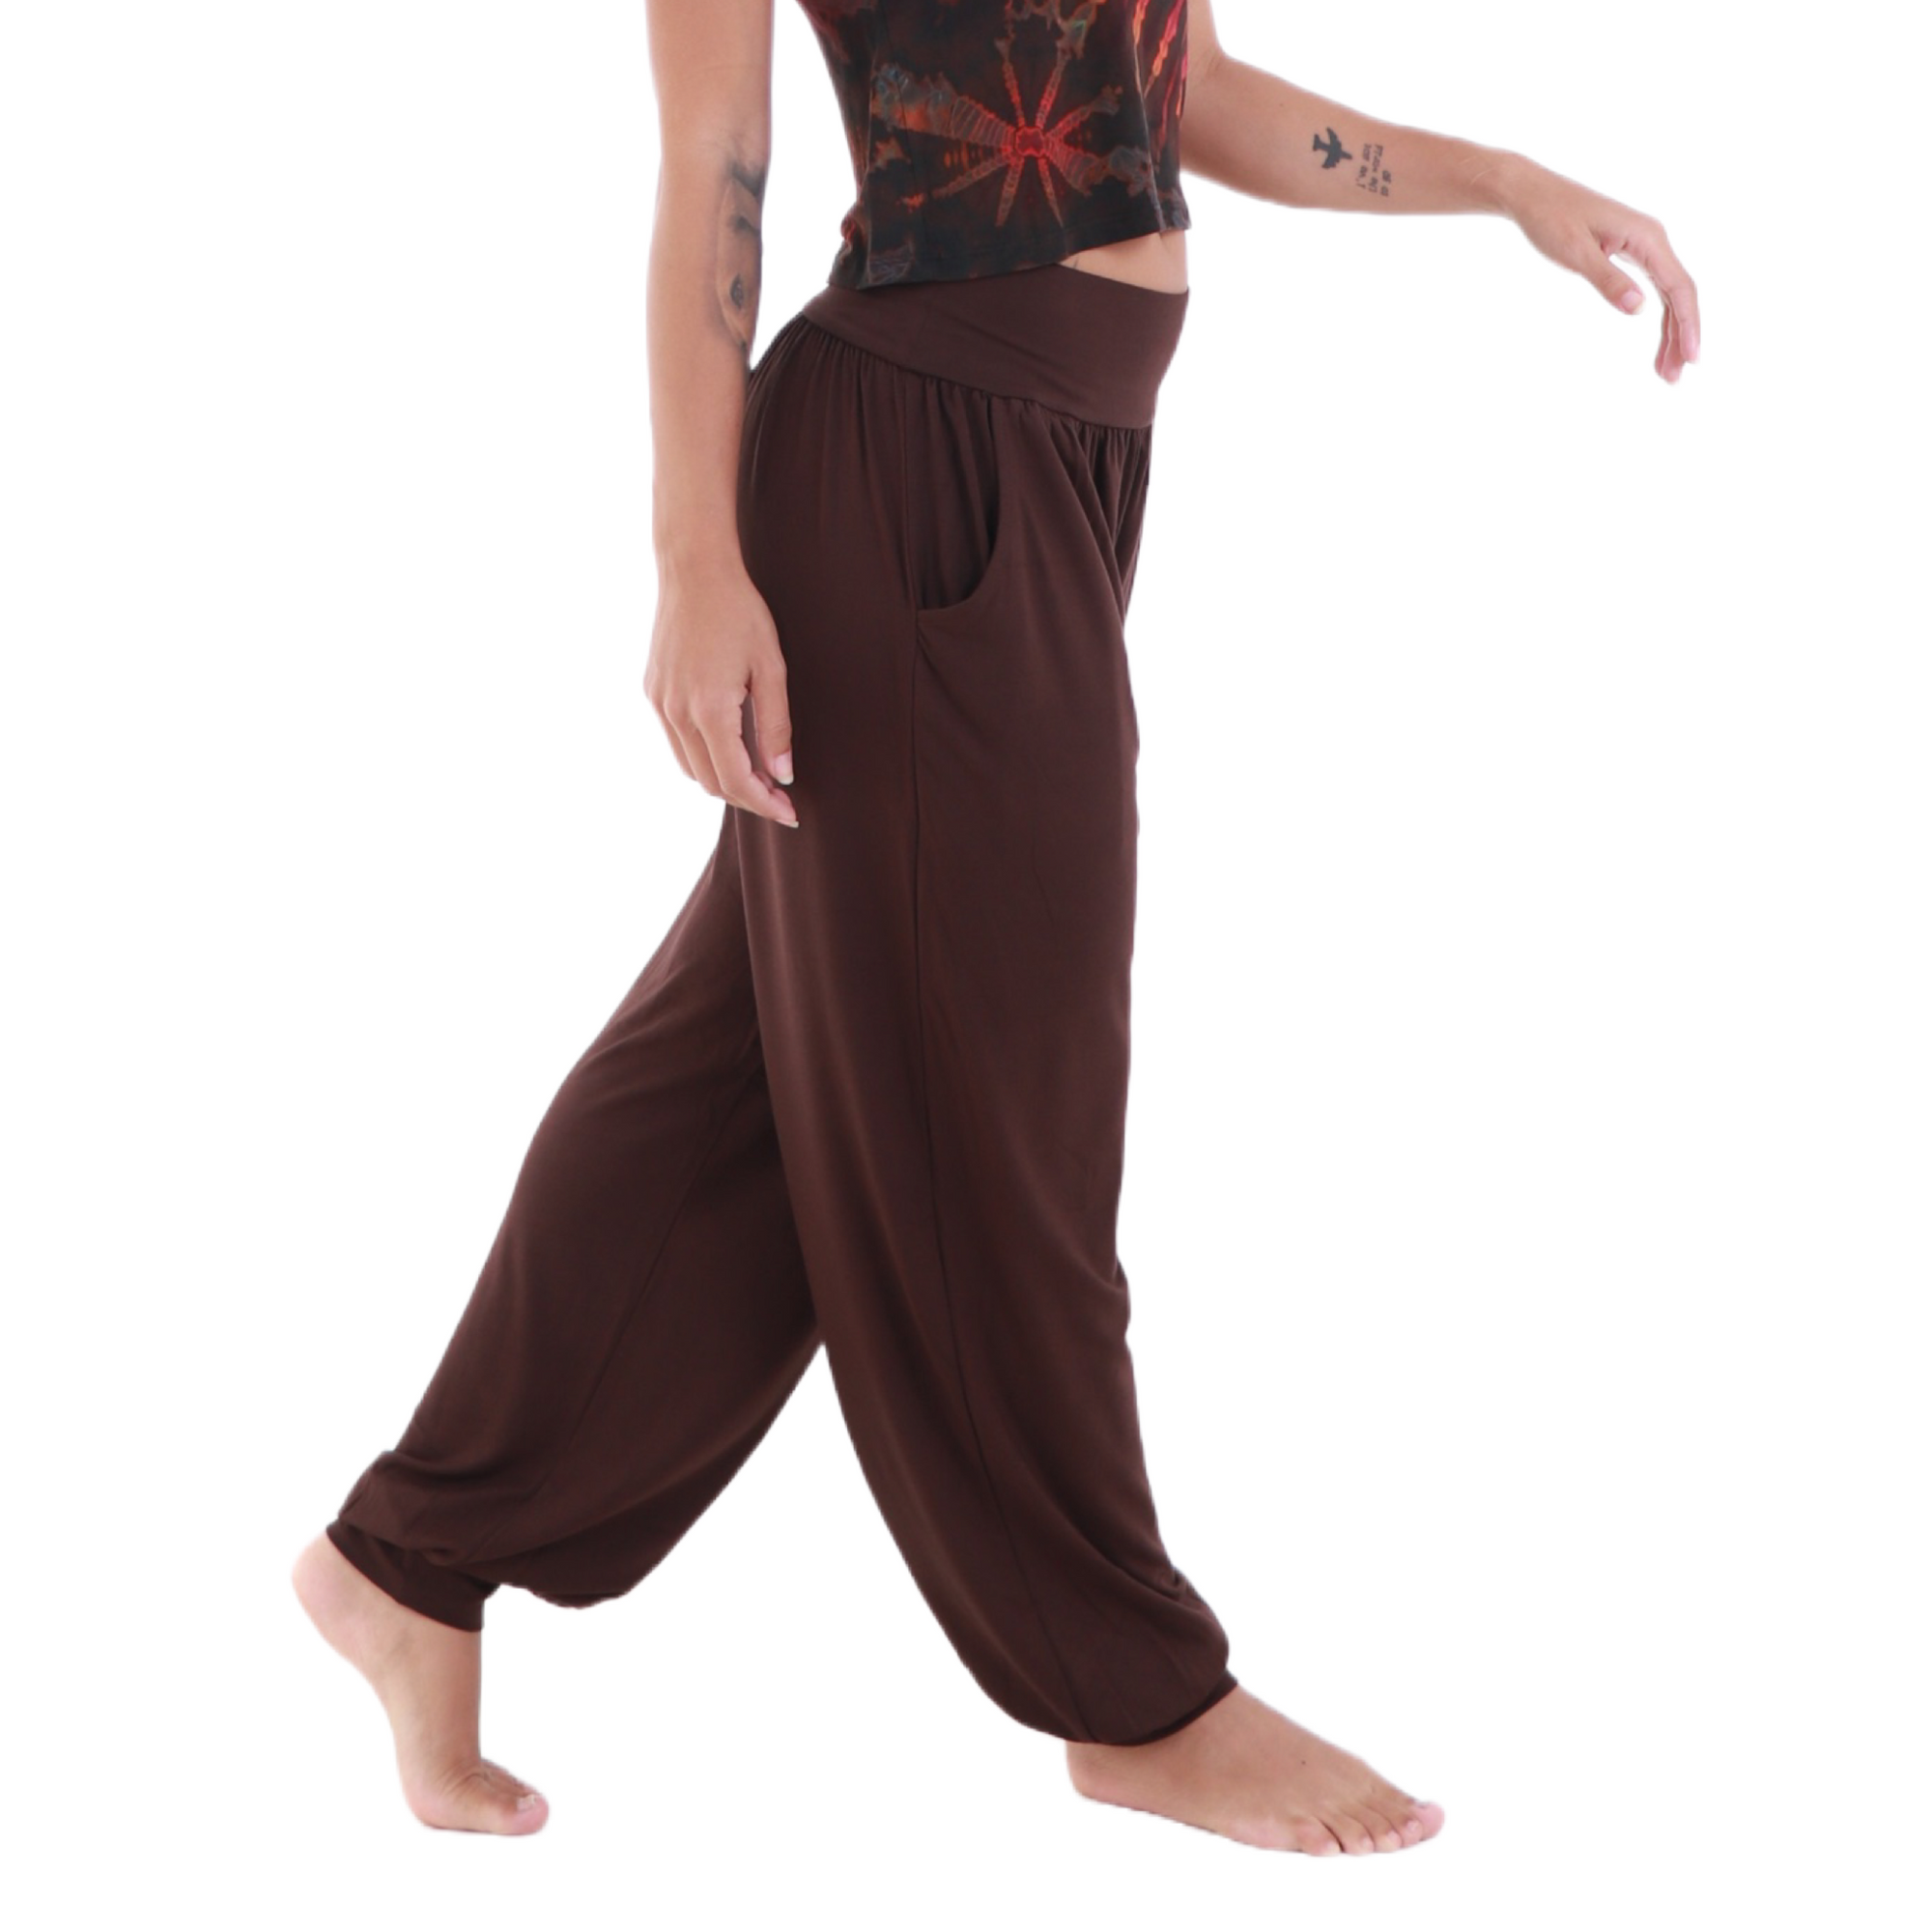 brown unisex harem pants | free delivery all orders $99 or more